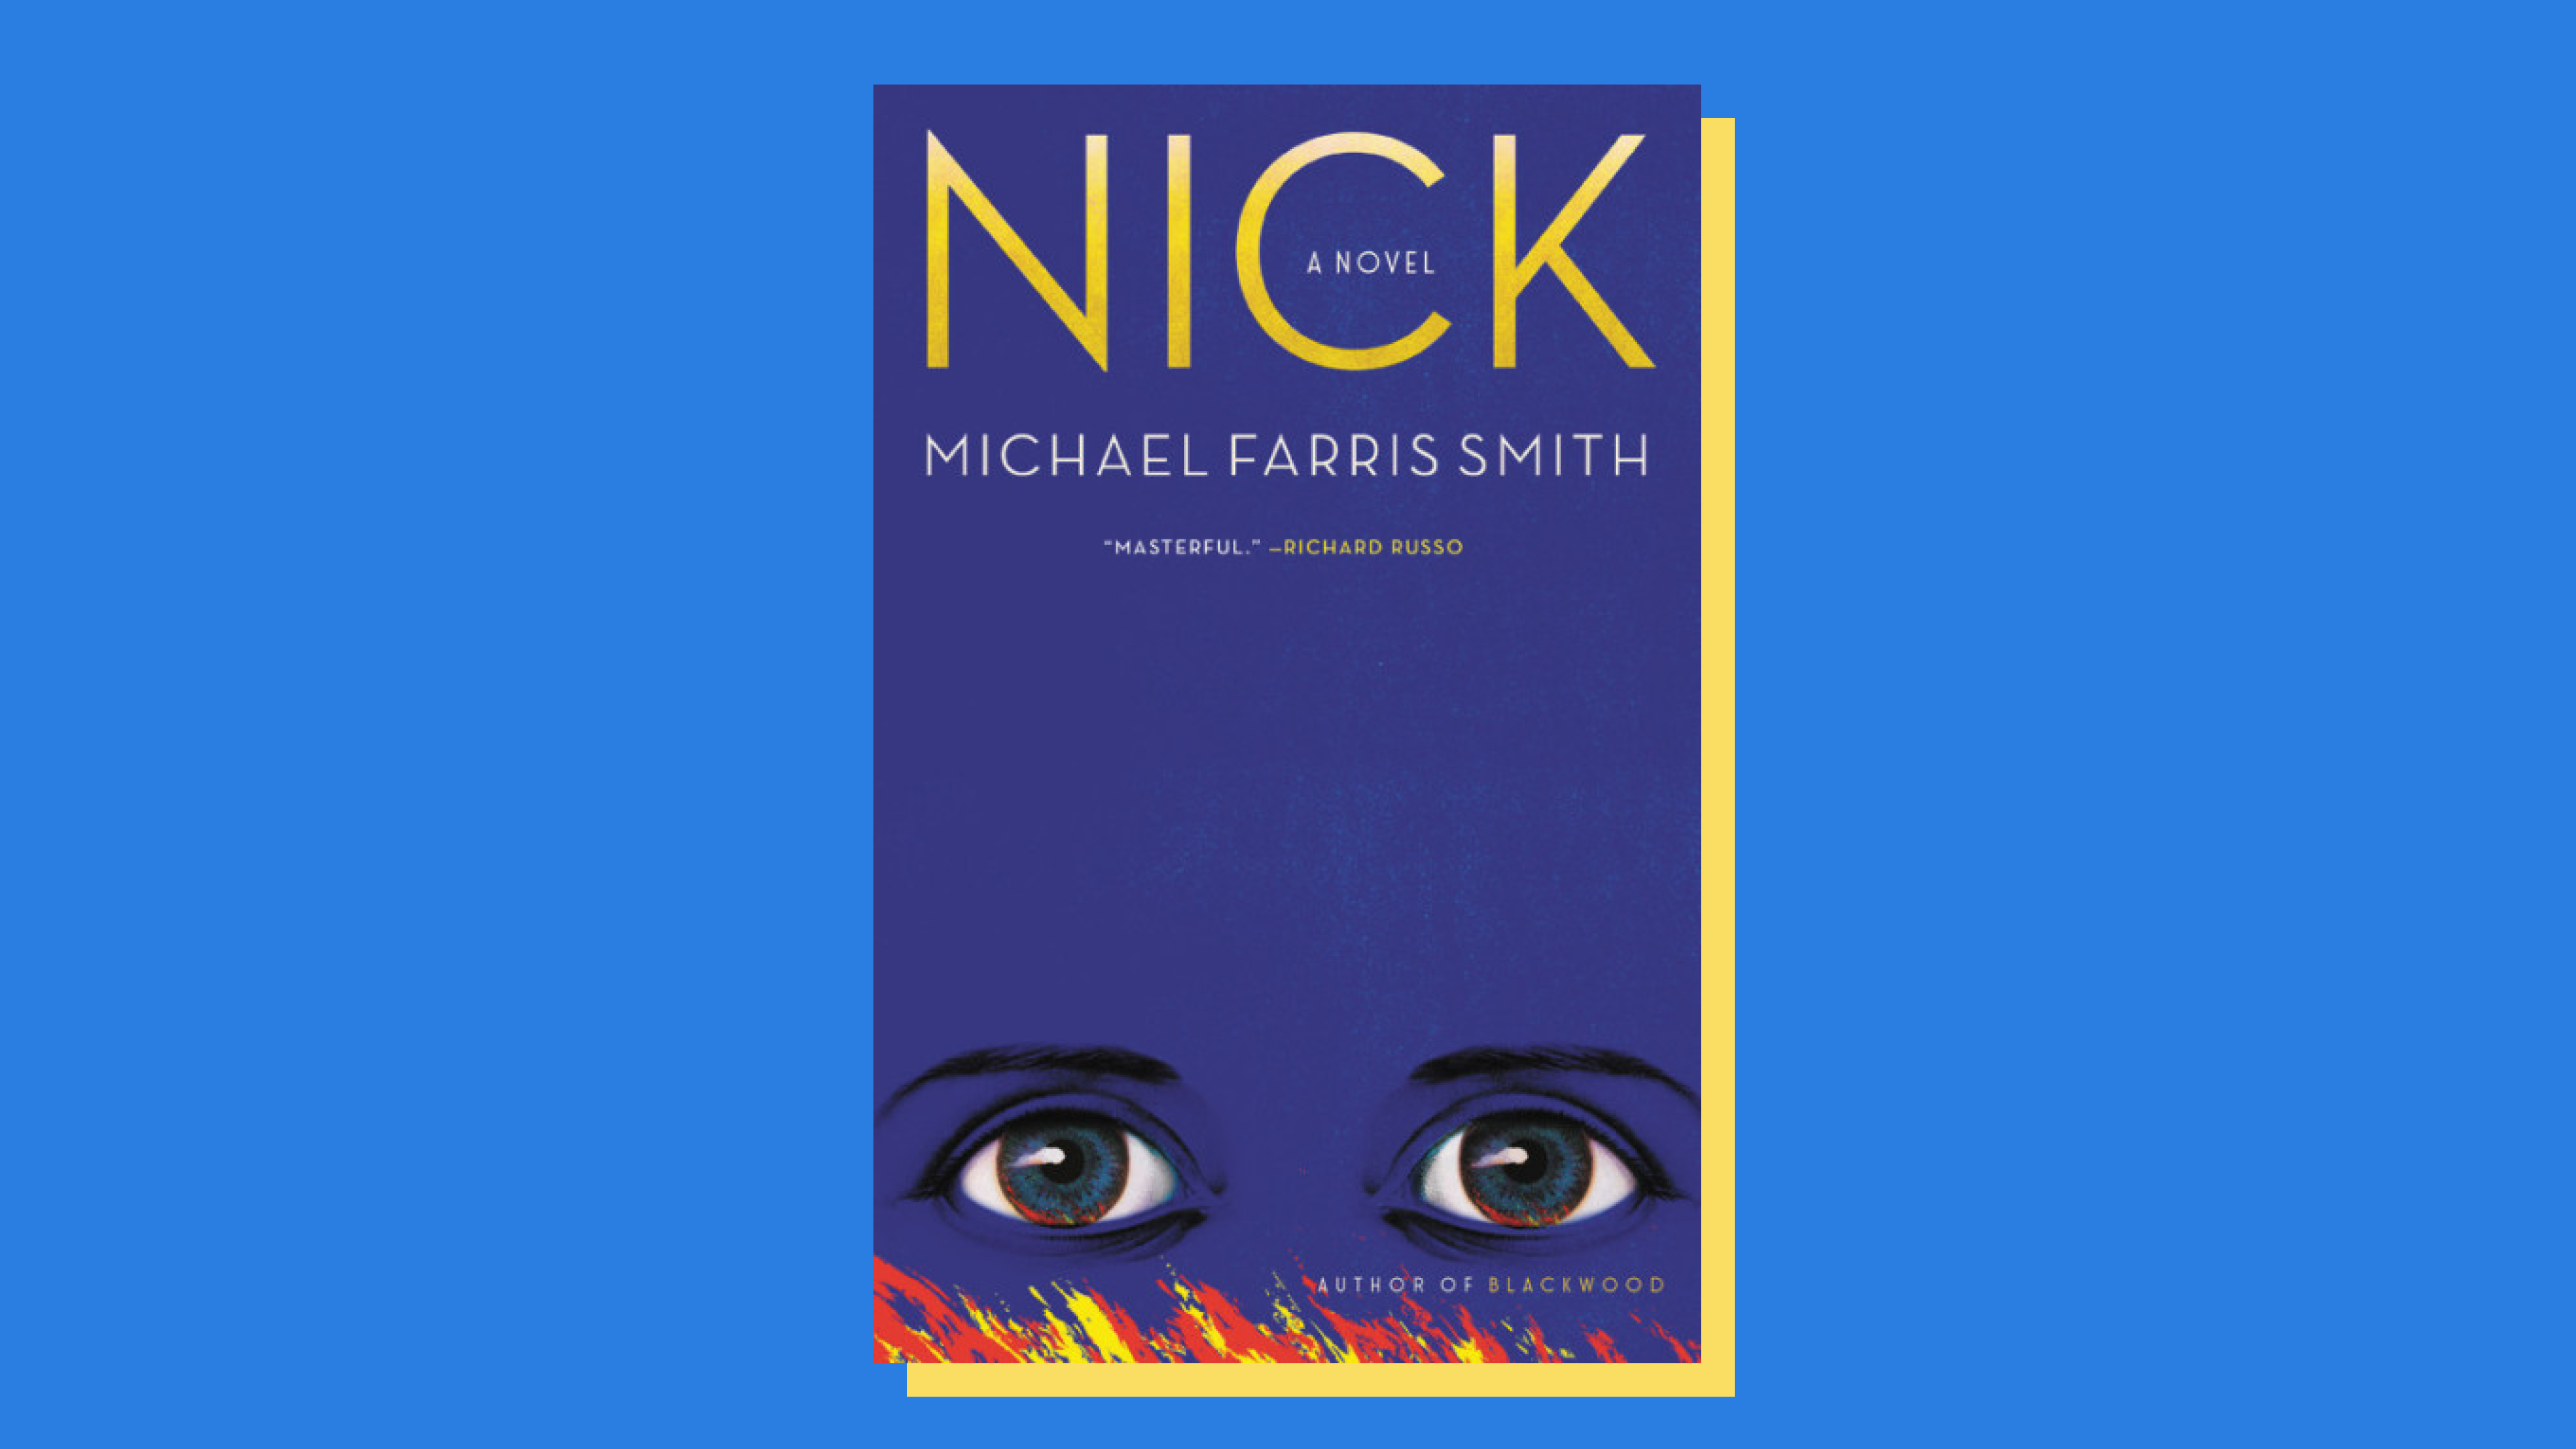 “Nick” by Michael Farris Smith